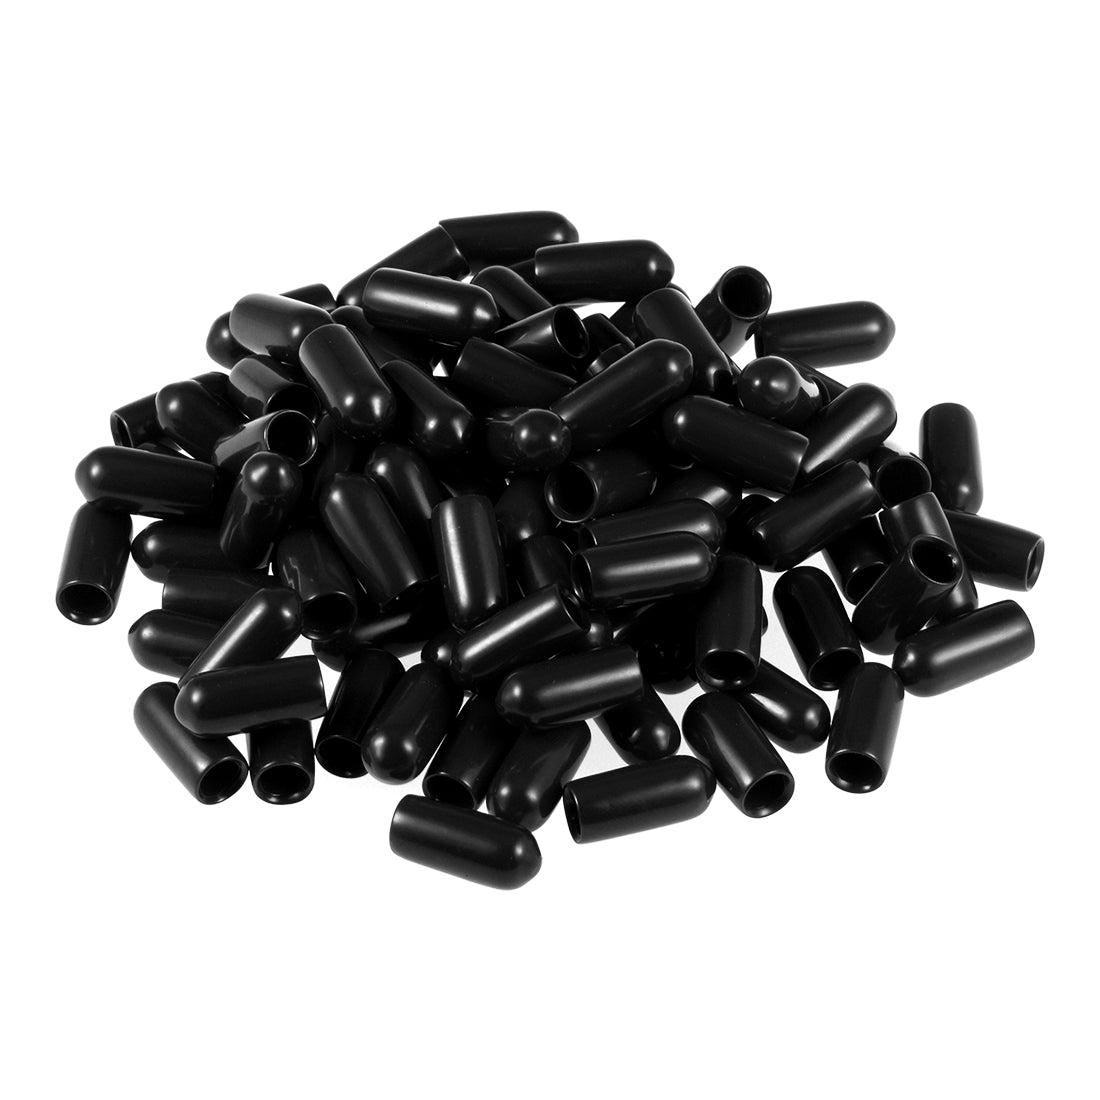 uxcell Uxcell 200pcs Rubber End Caps 5mm ID 15mm Height Screw Thread Protectors Black